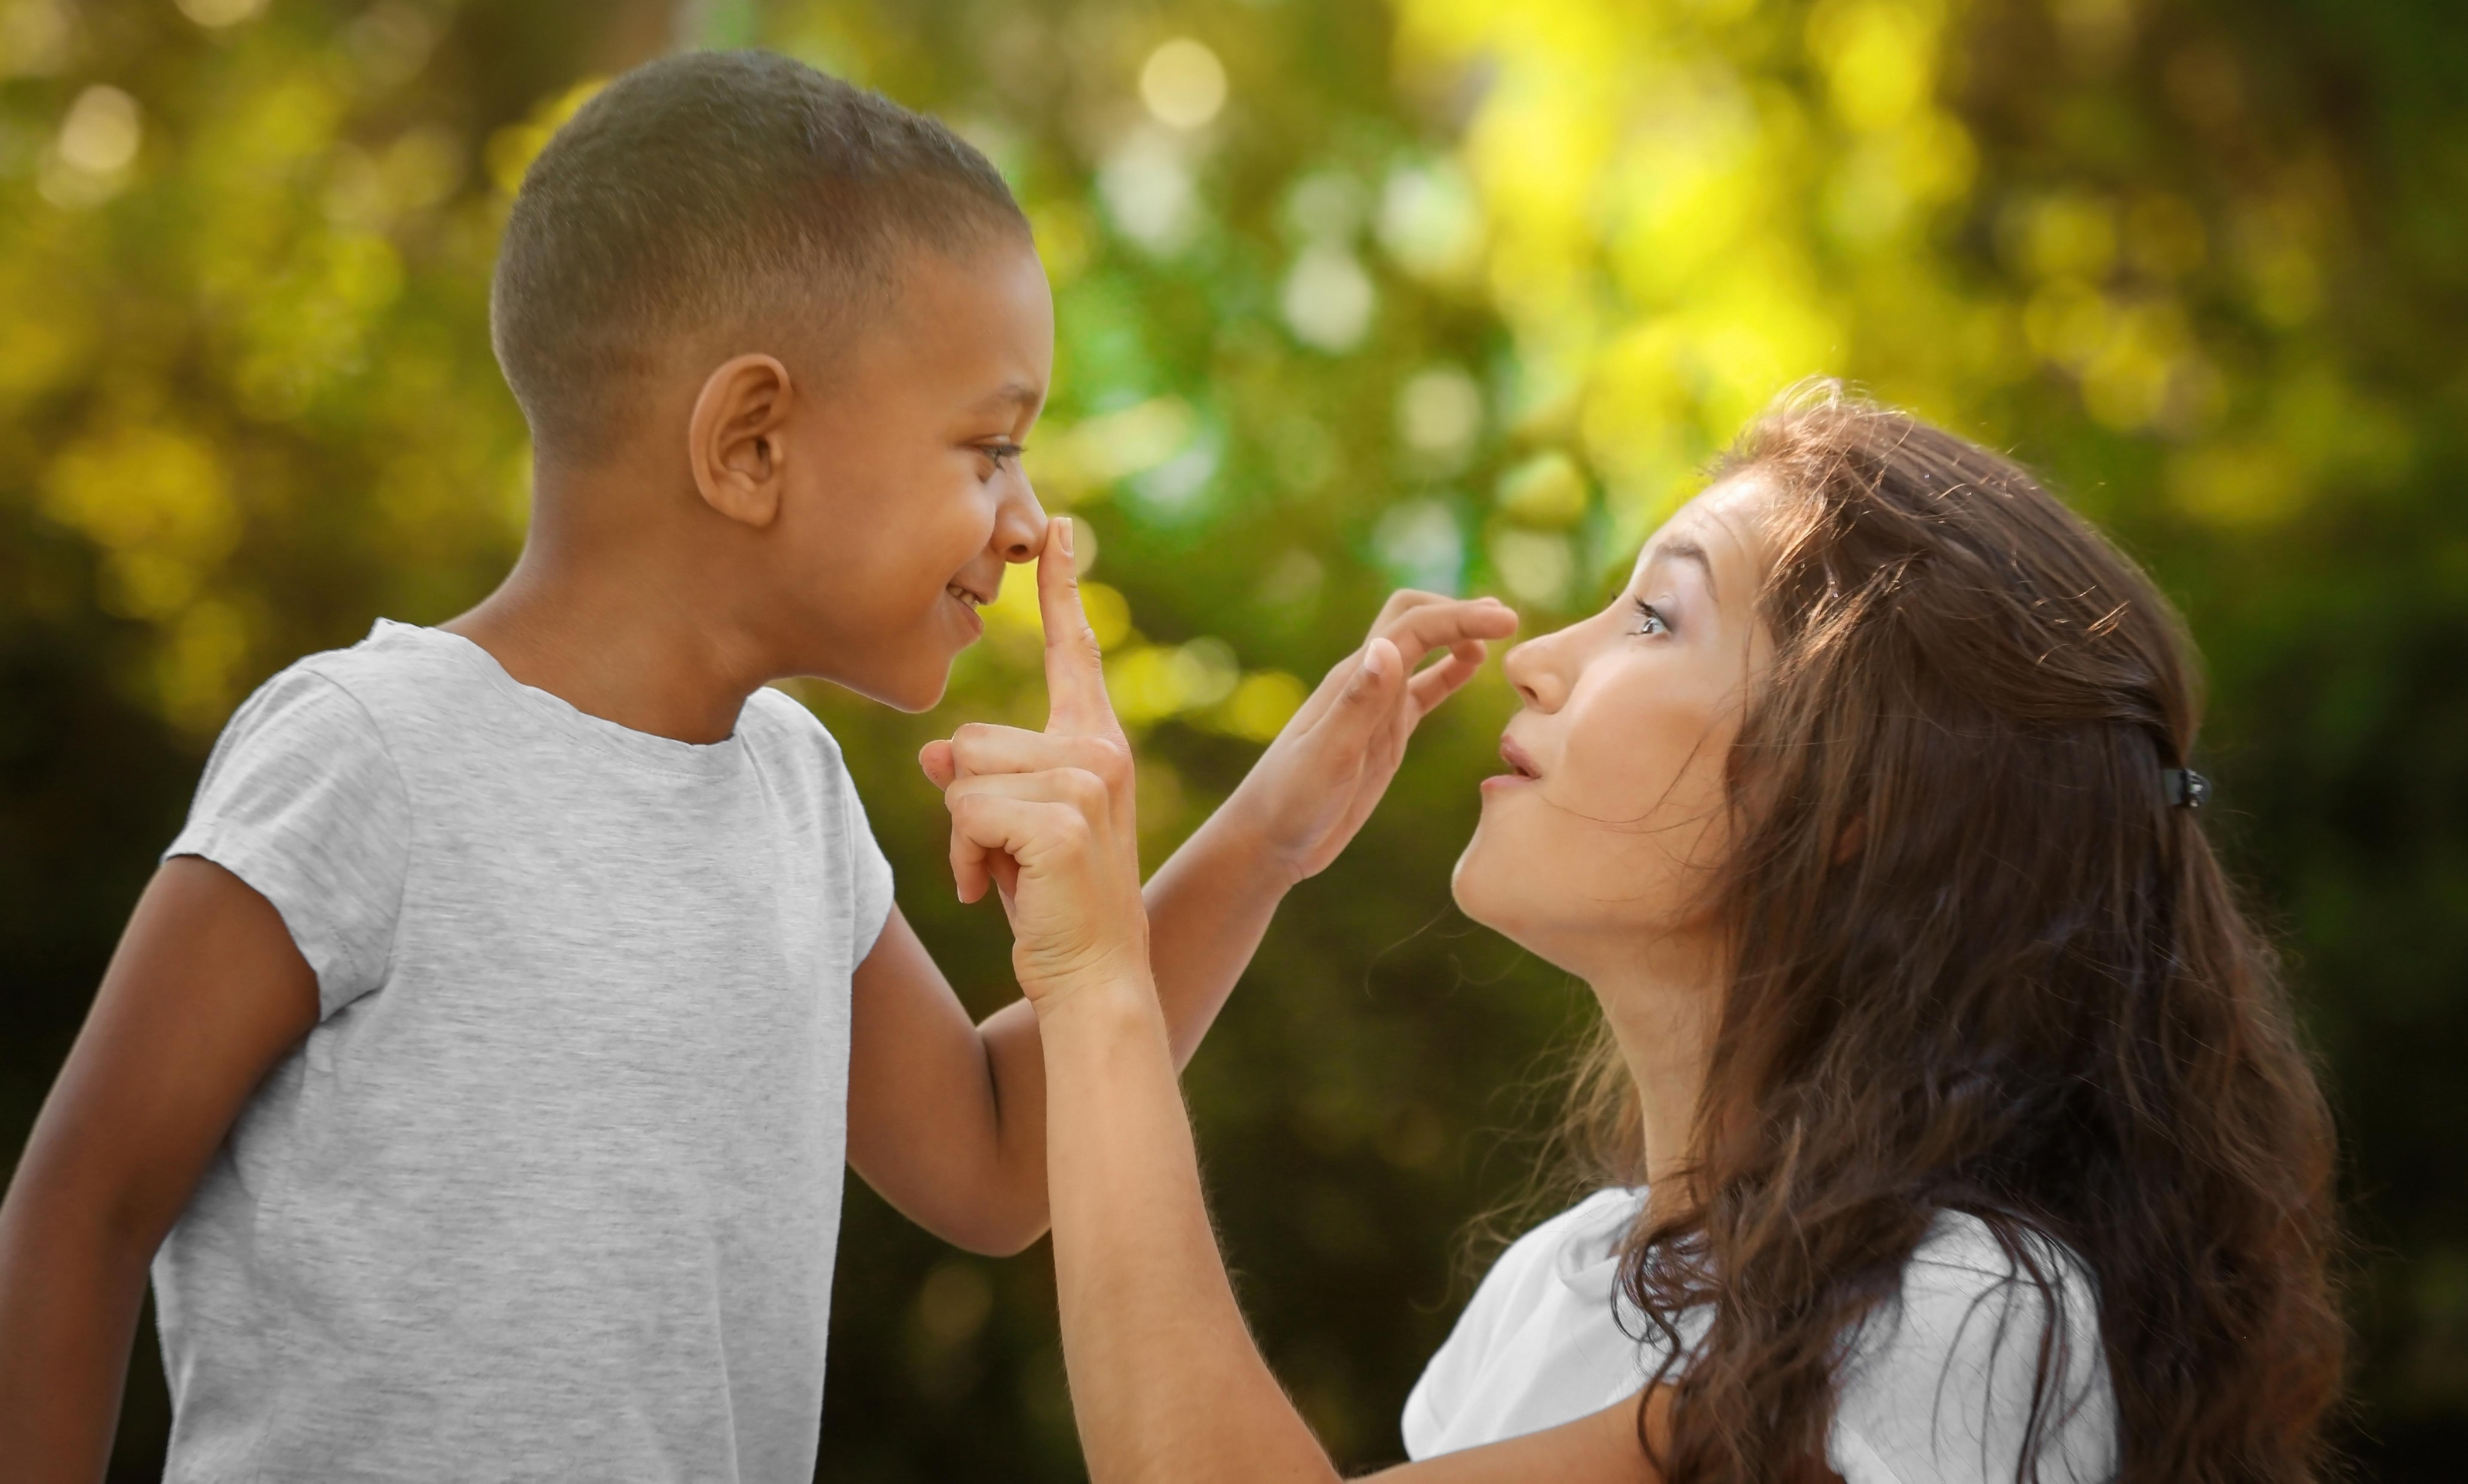 mother touching foster child's nose